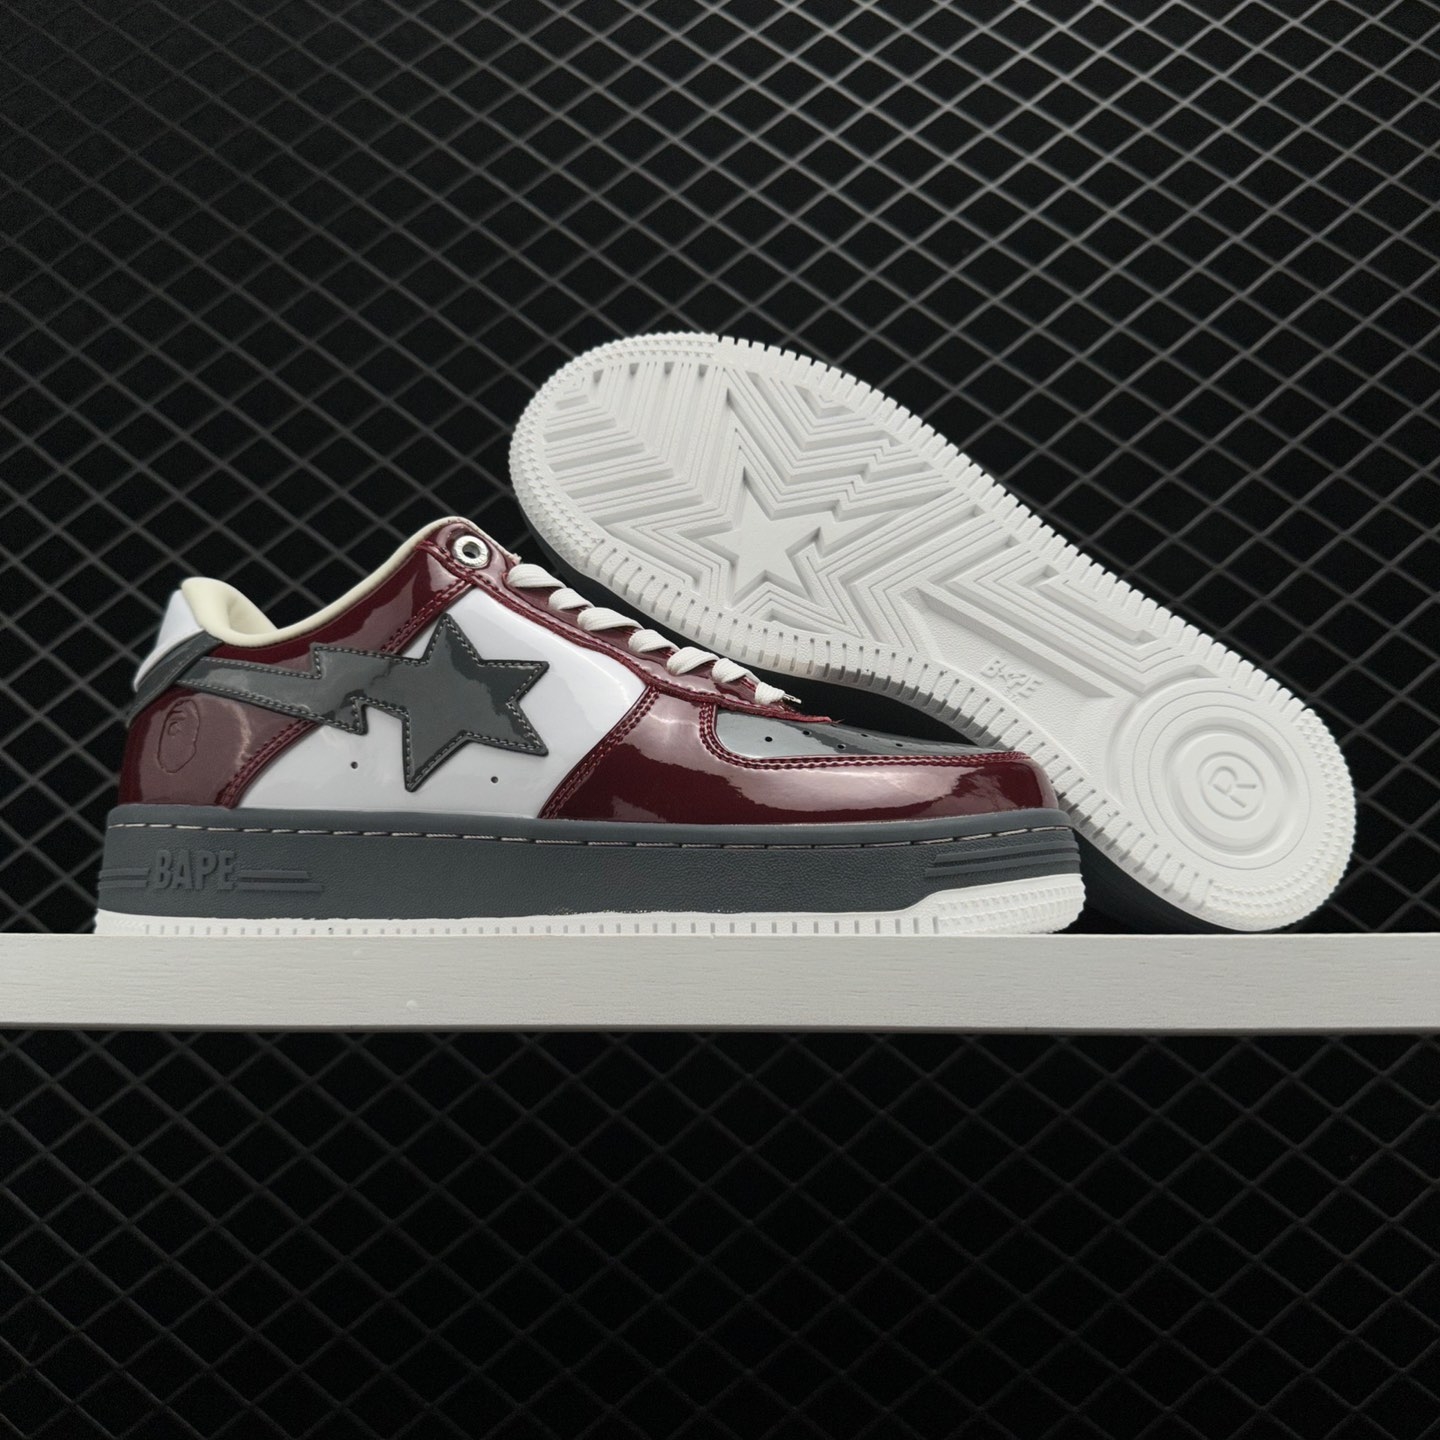 A BATHING APE Bape Sta Wine Red White Sneakers - Limited Edition